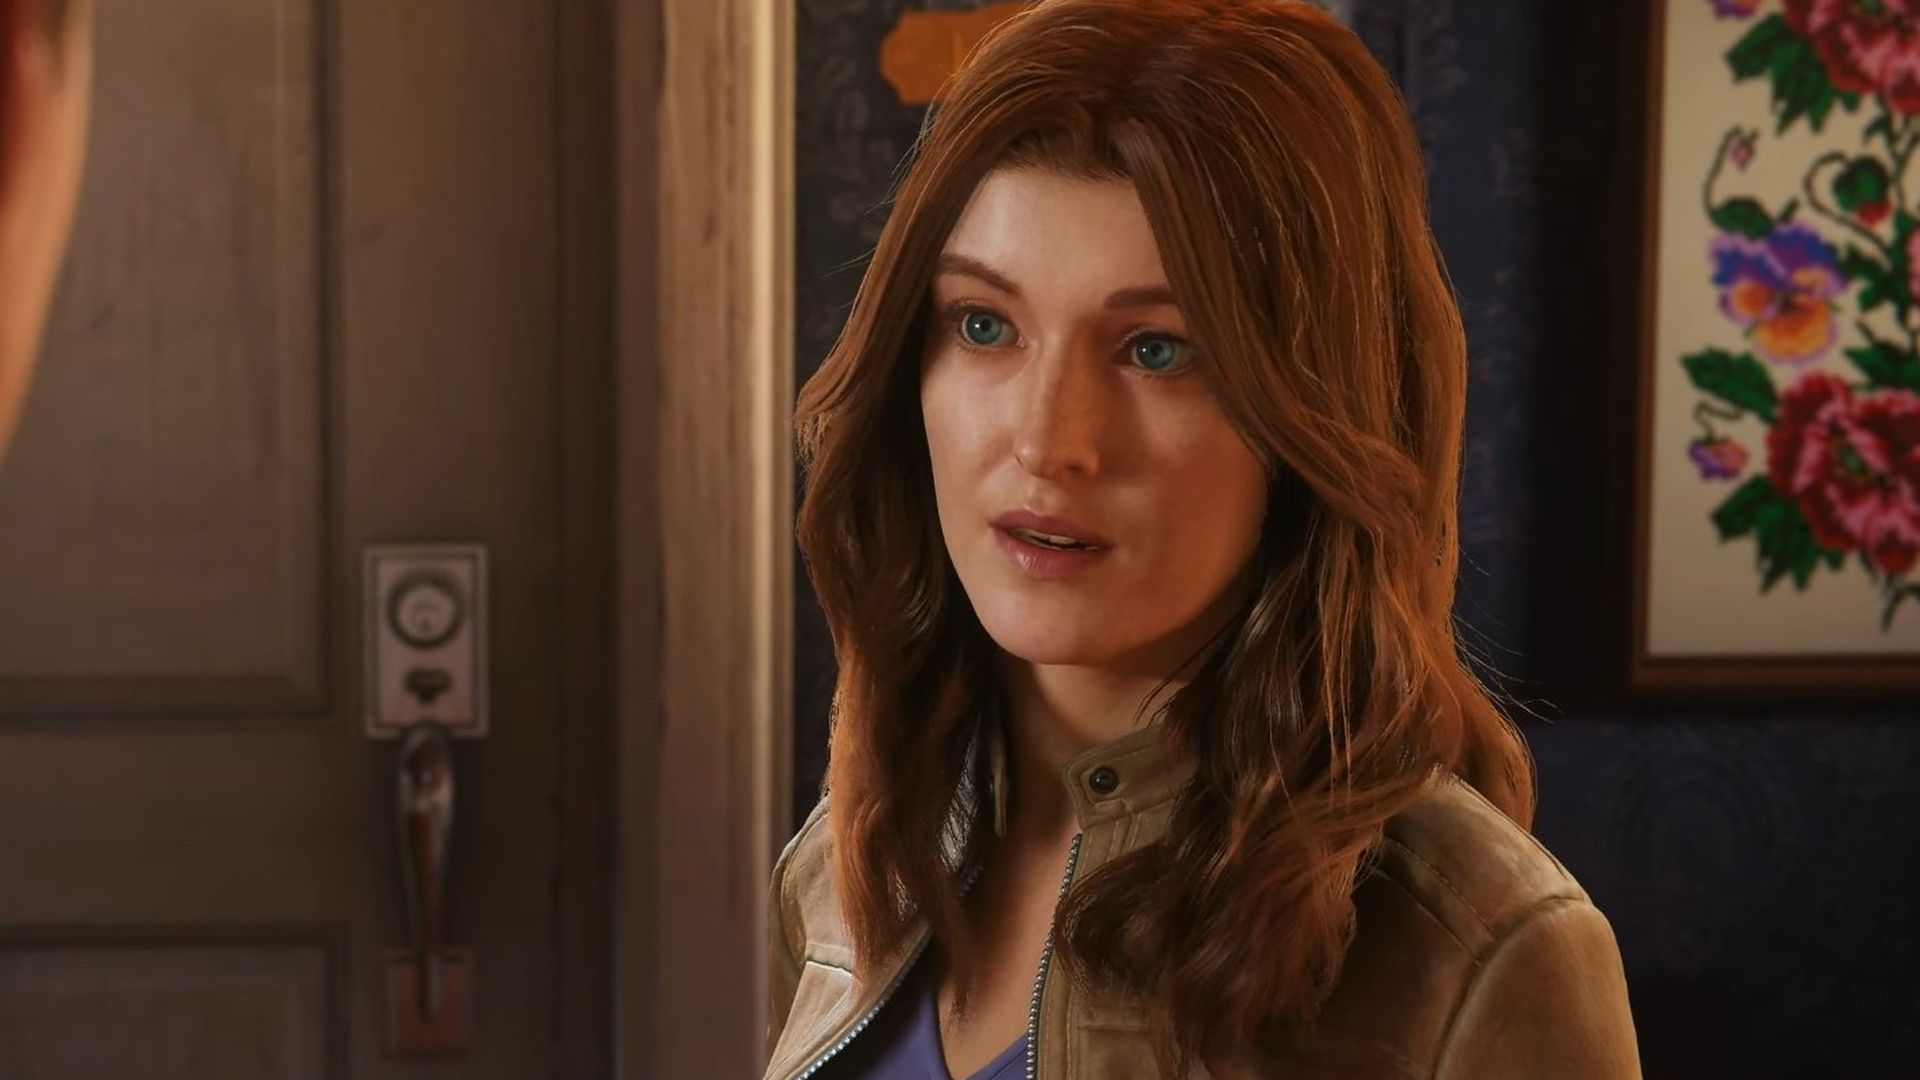 Marvel’s Spider-Man 2 Developer Says Mary Jane Has the “Same Face Model, Same Actress”